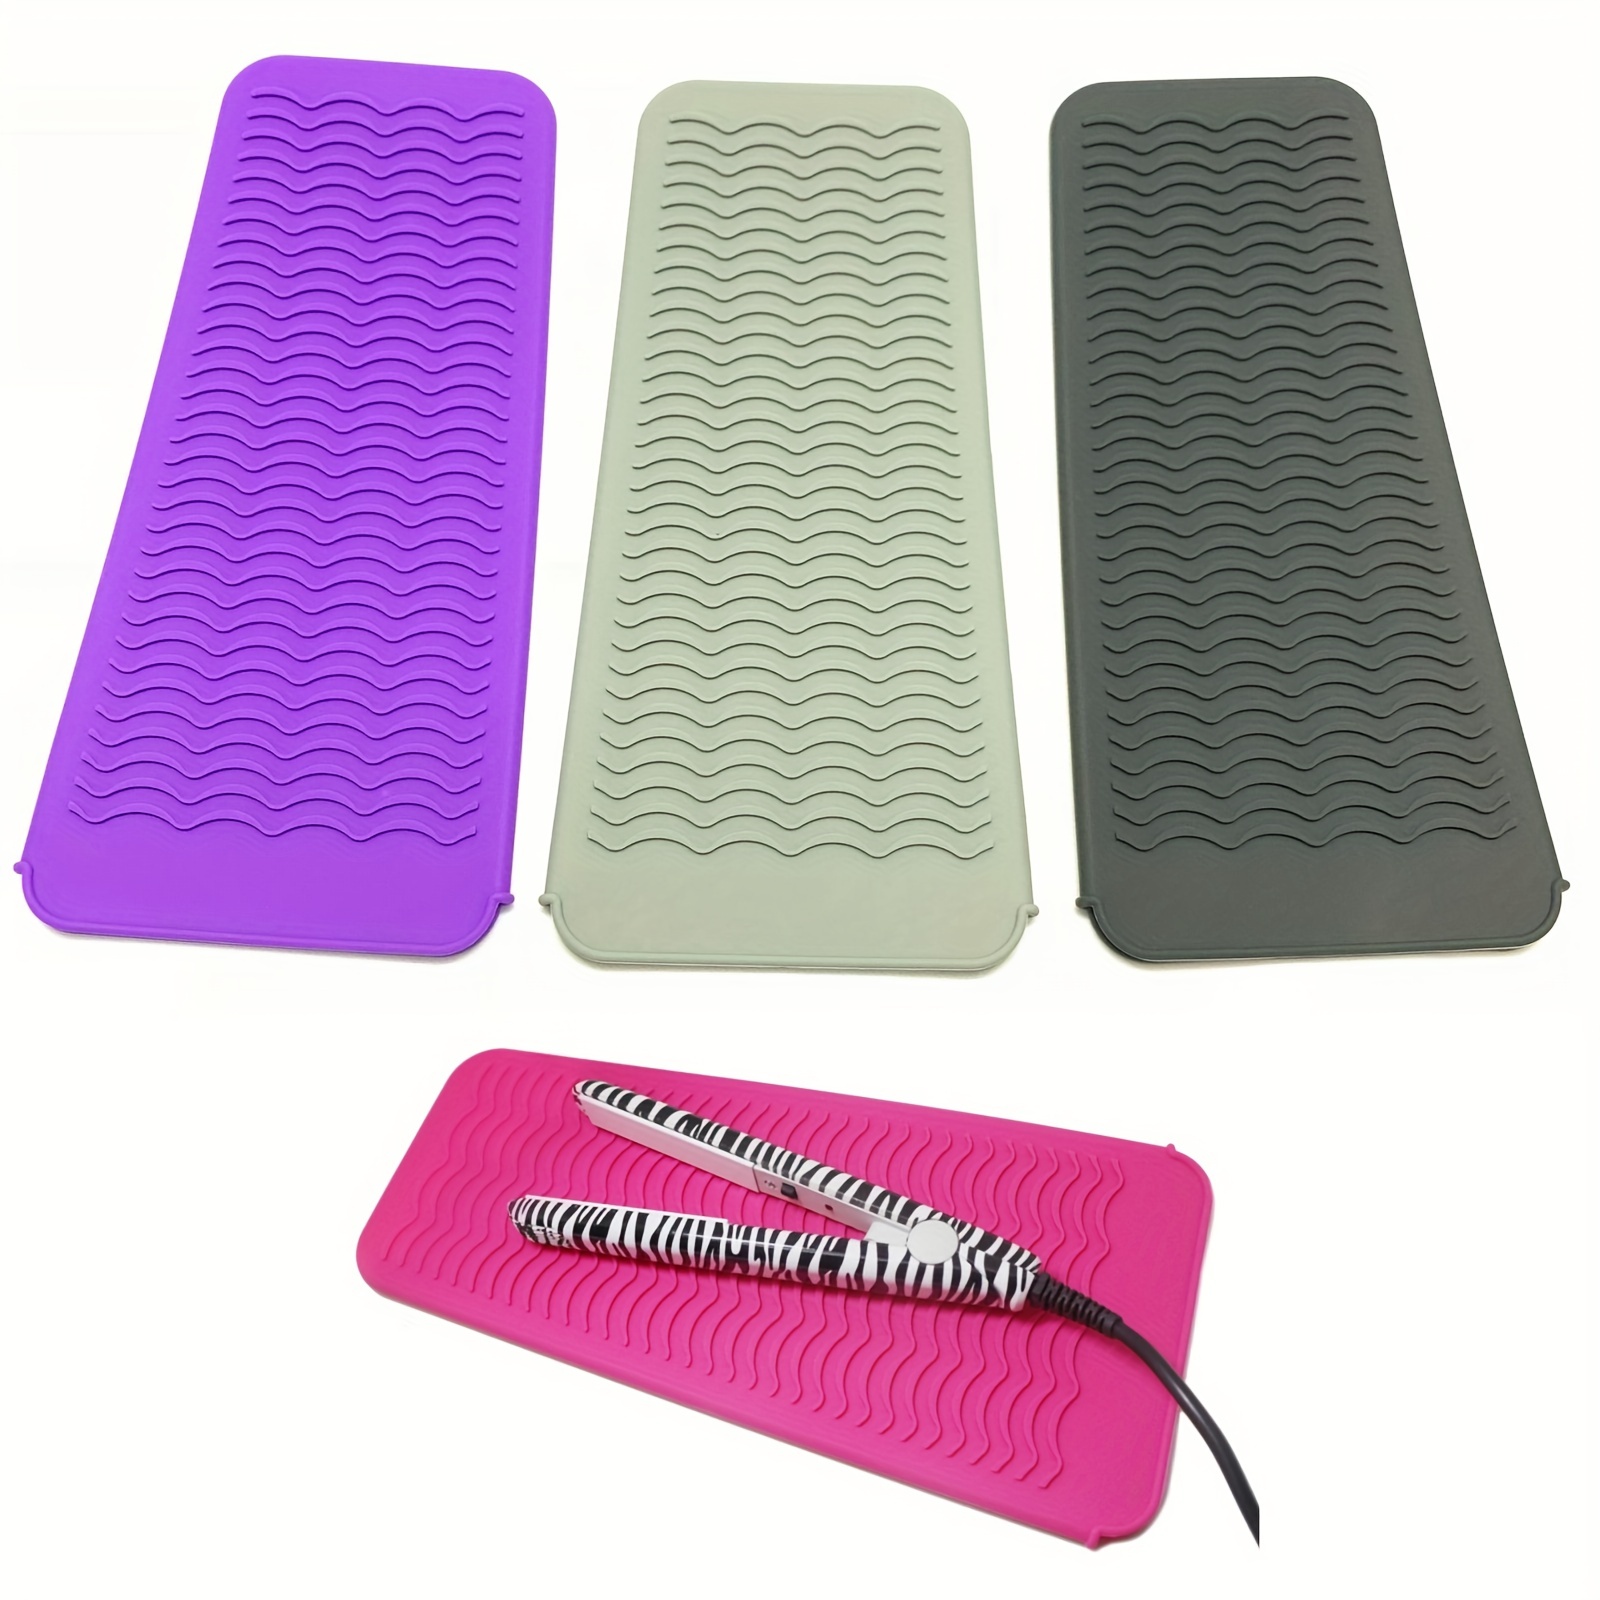 ZAXOP 2 Pack Heat Resistant Silicone Mat Pouch for Flat Iron, Curling  Iron,Hair Straightener,Hair Curling Wands,Hot Hair Tools (Grey & HOT Pink)